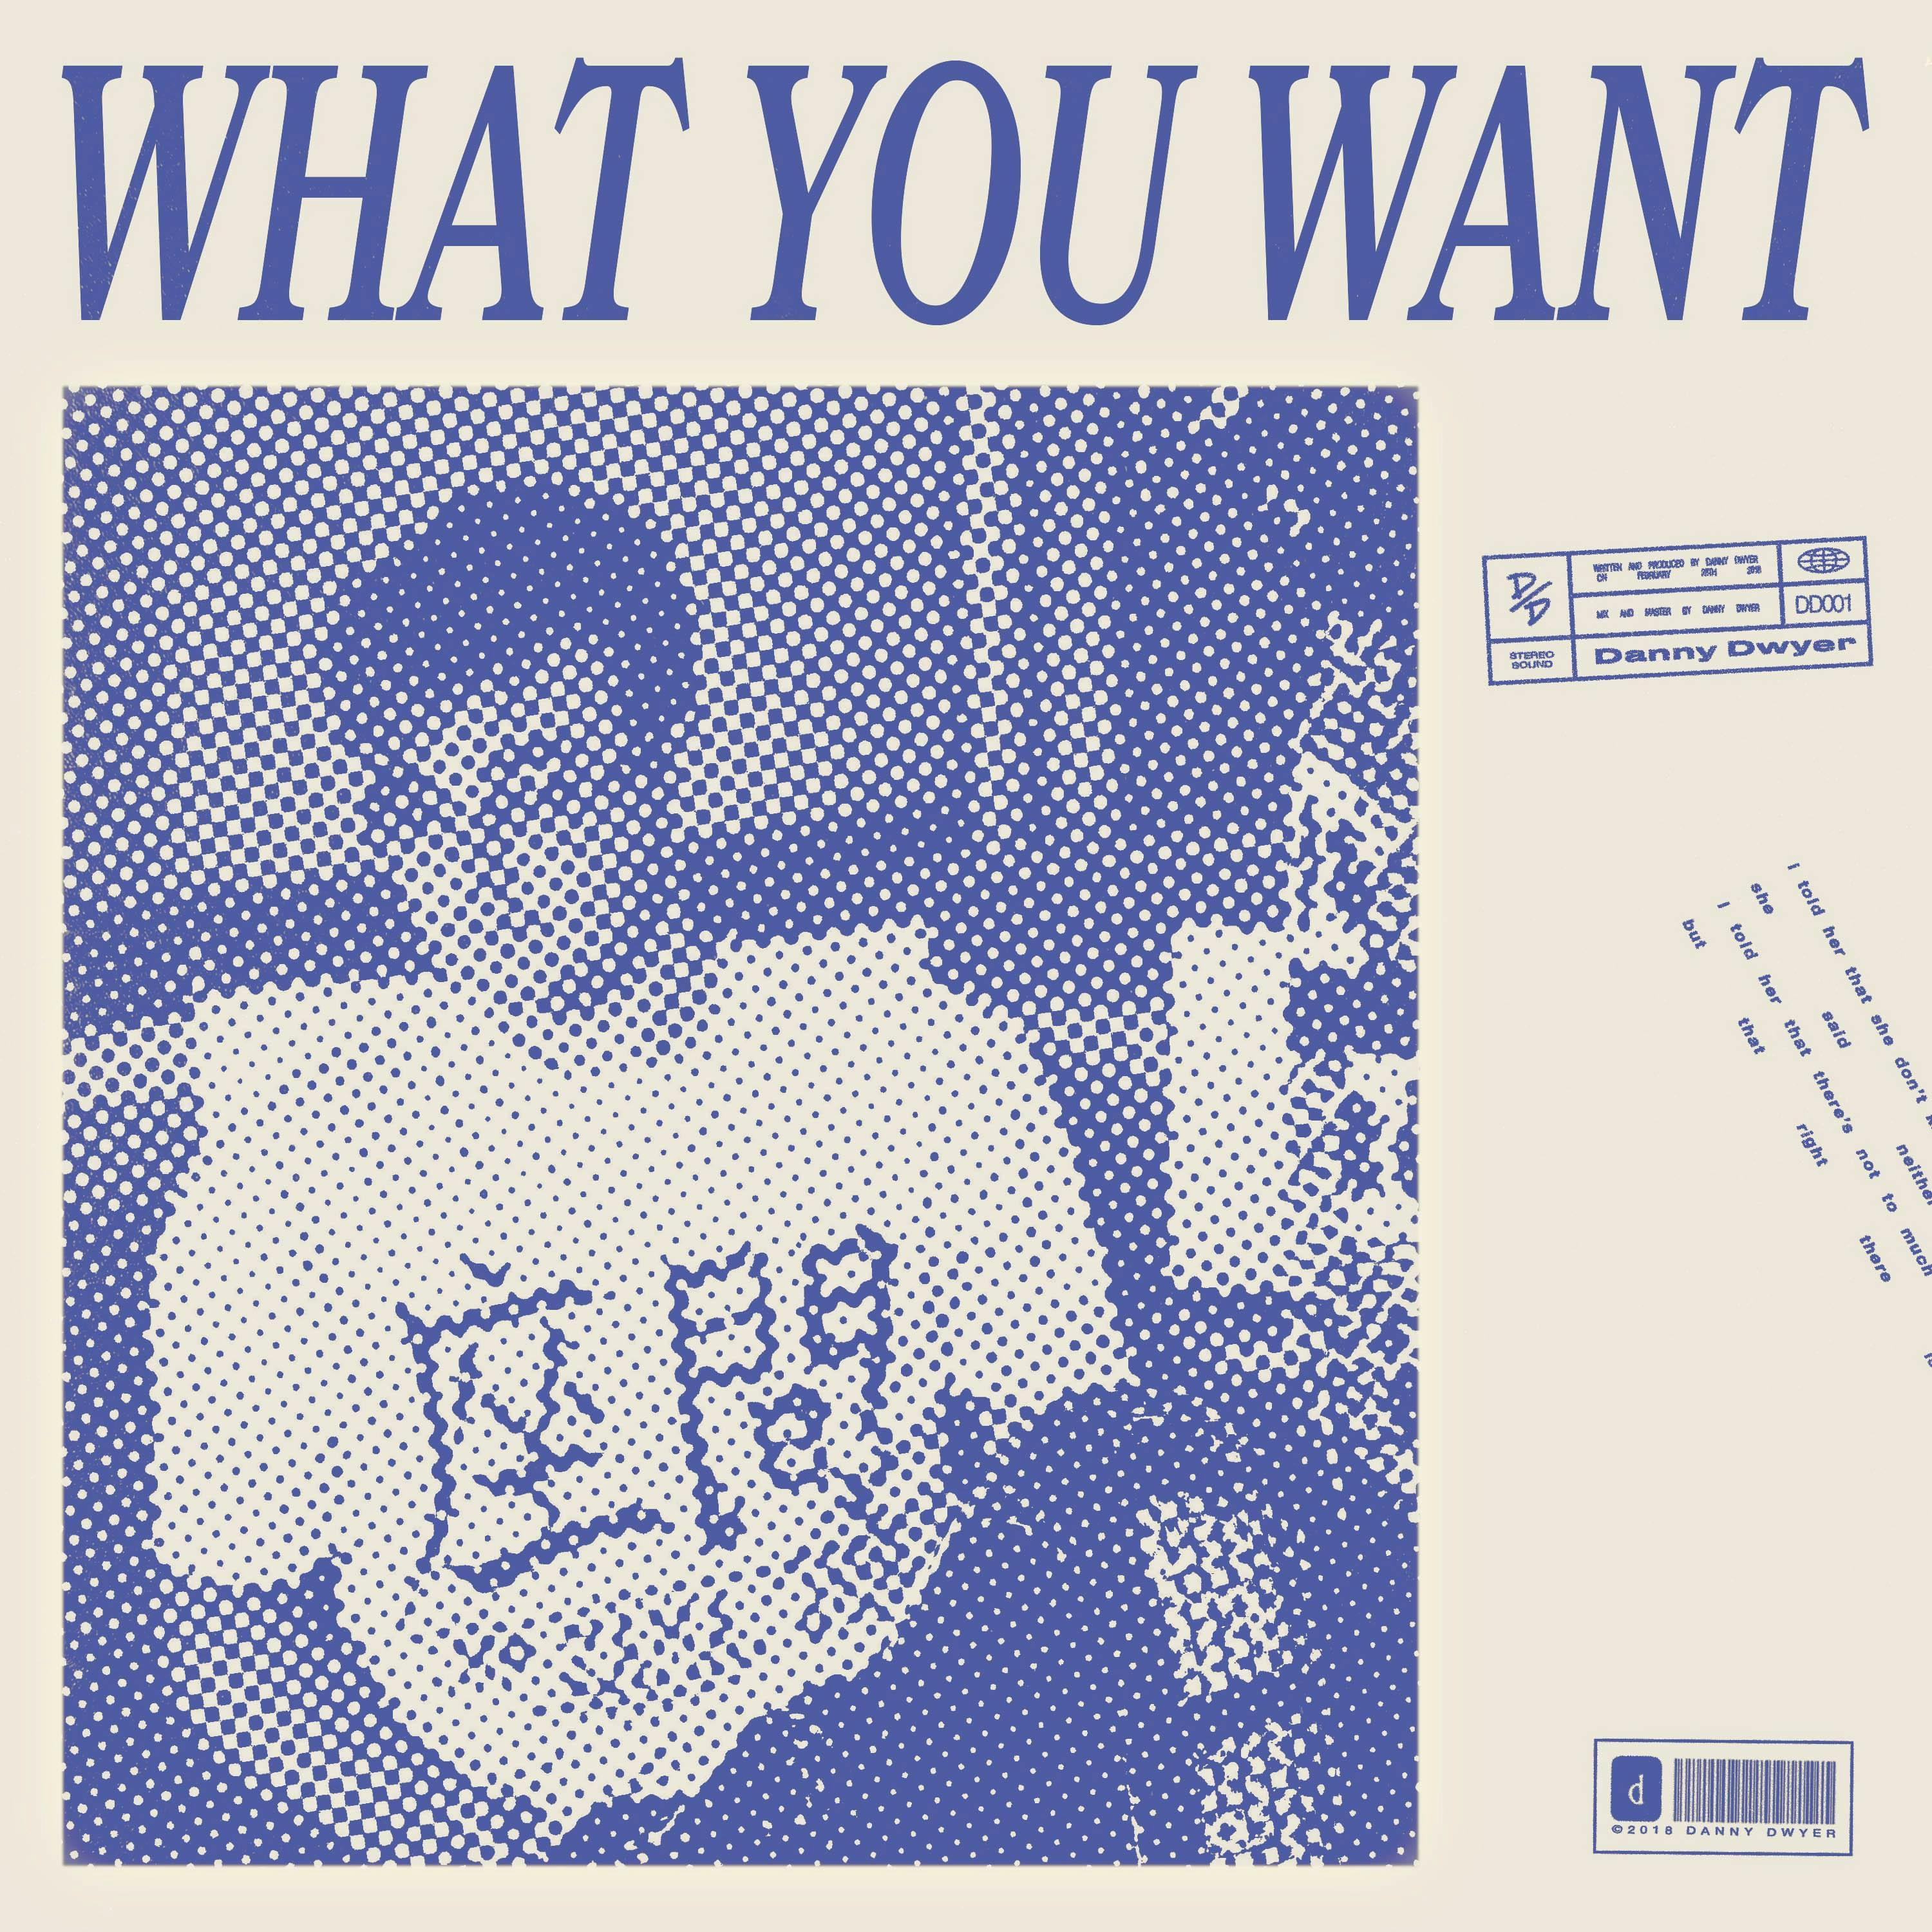 Cover art for Danny Dwyer's song: What You Want